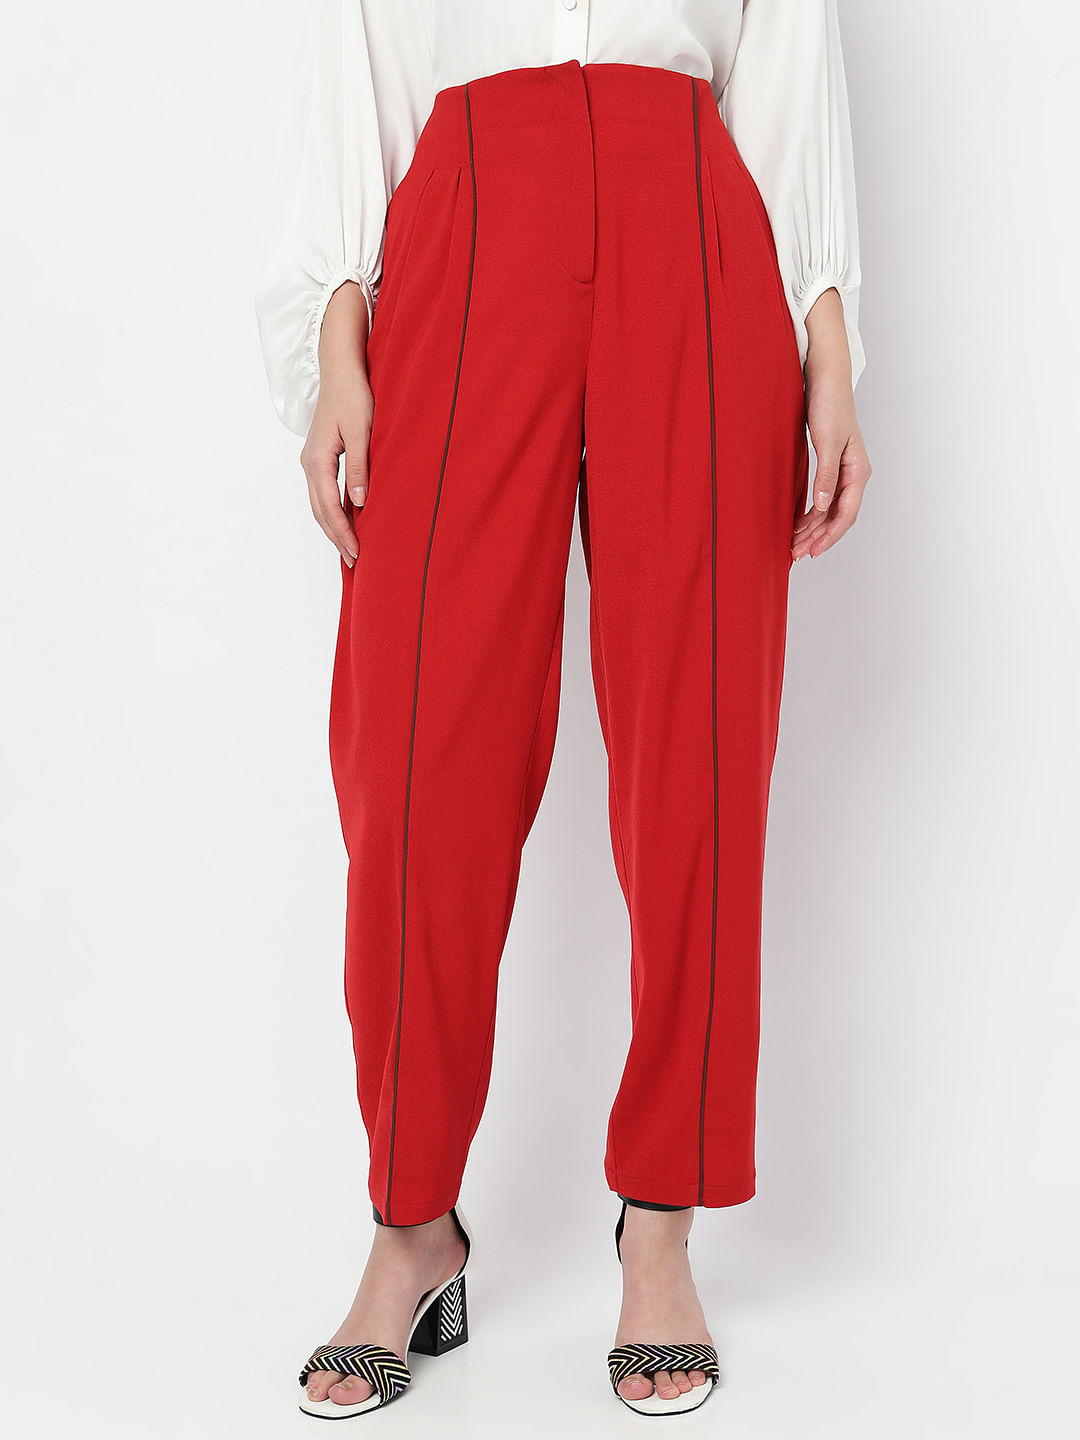 Red Woolen Pant For Women